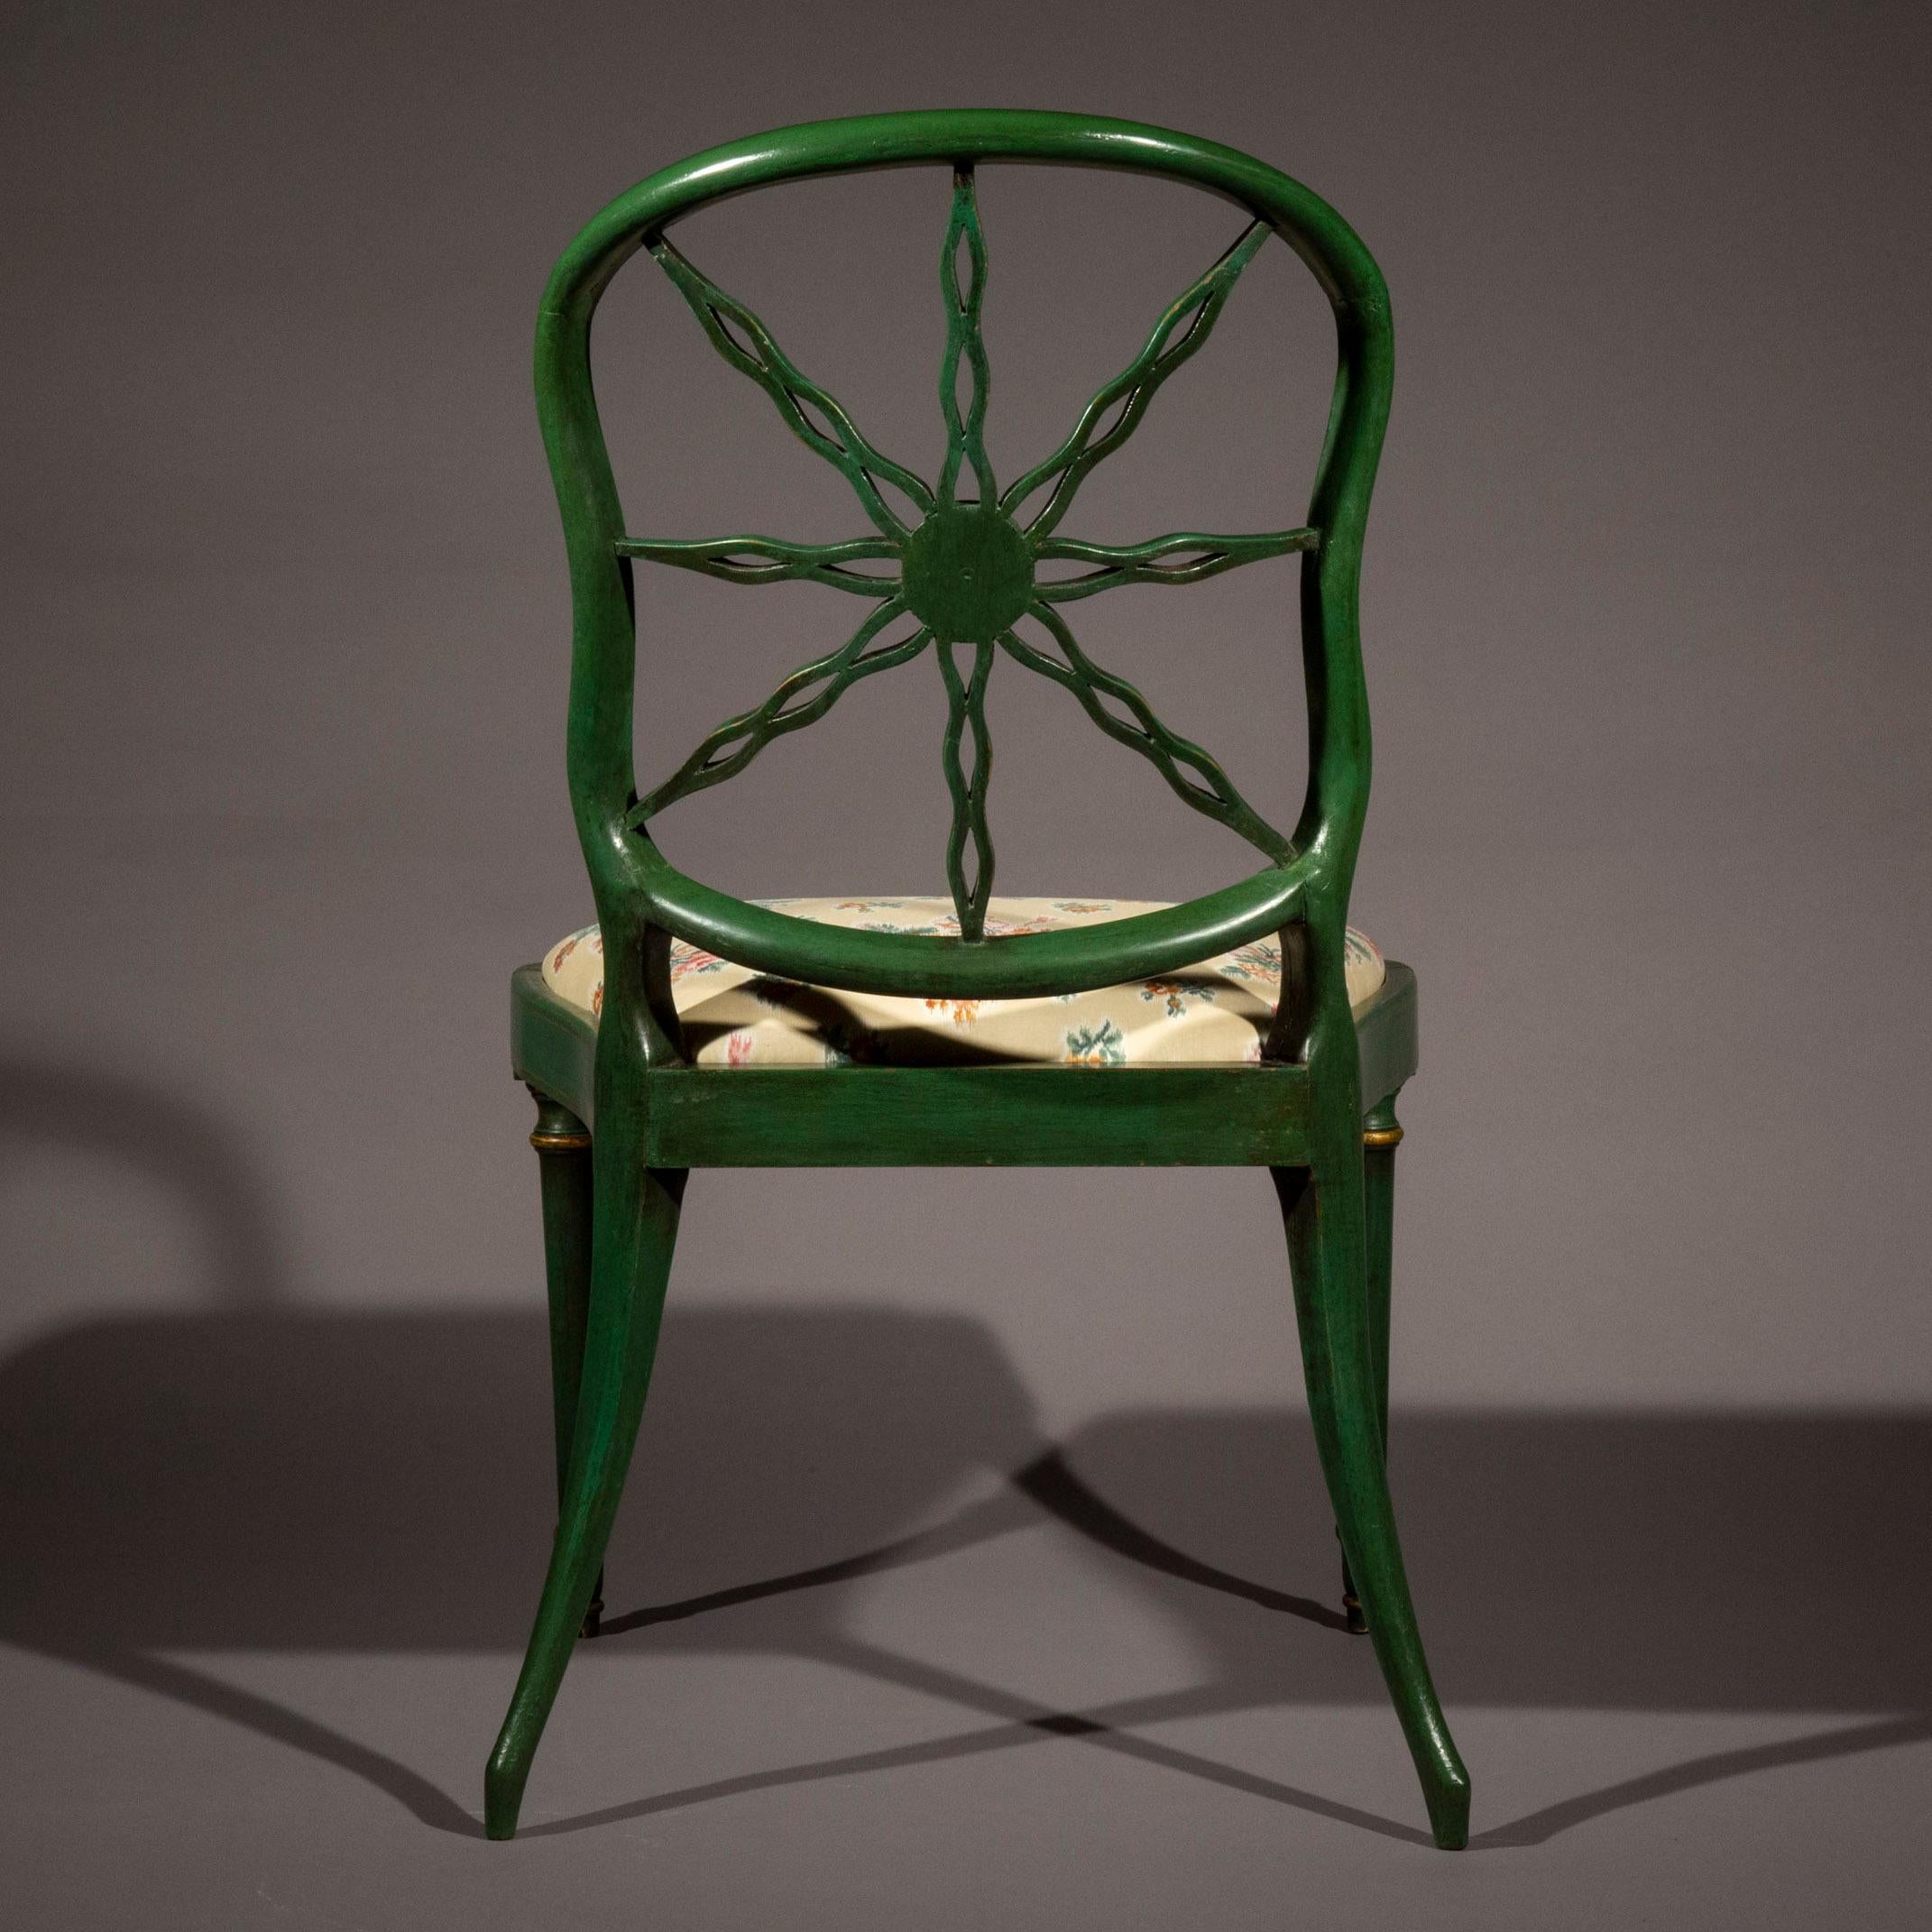 Pair of Antique Green Painted Chairs - 3 pairs available 2